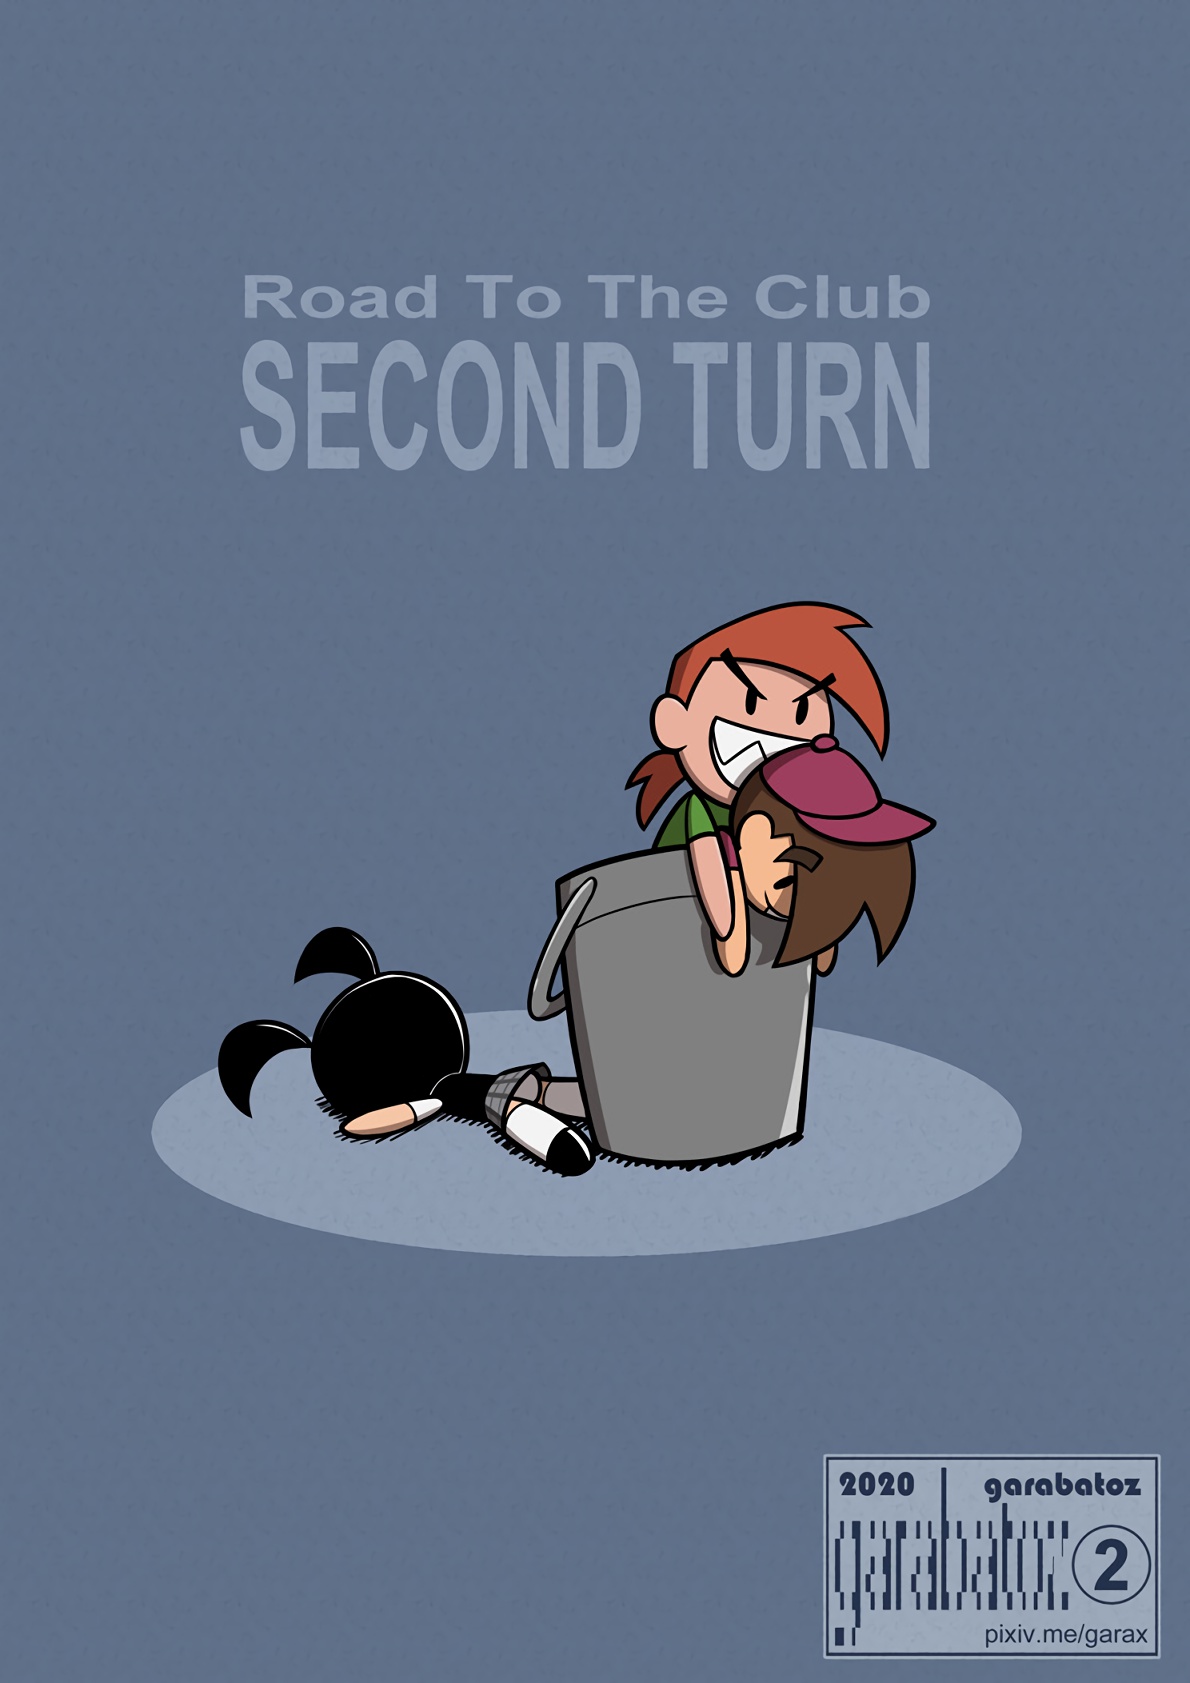 Road to the club: second turn